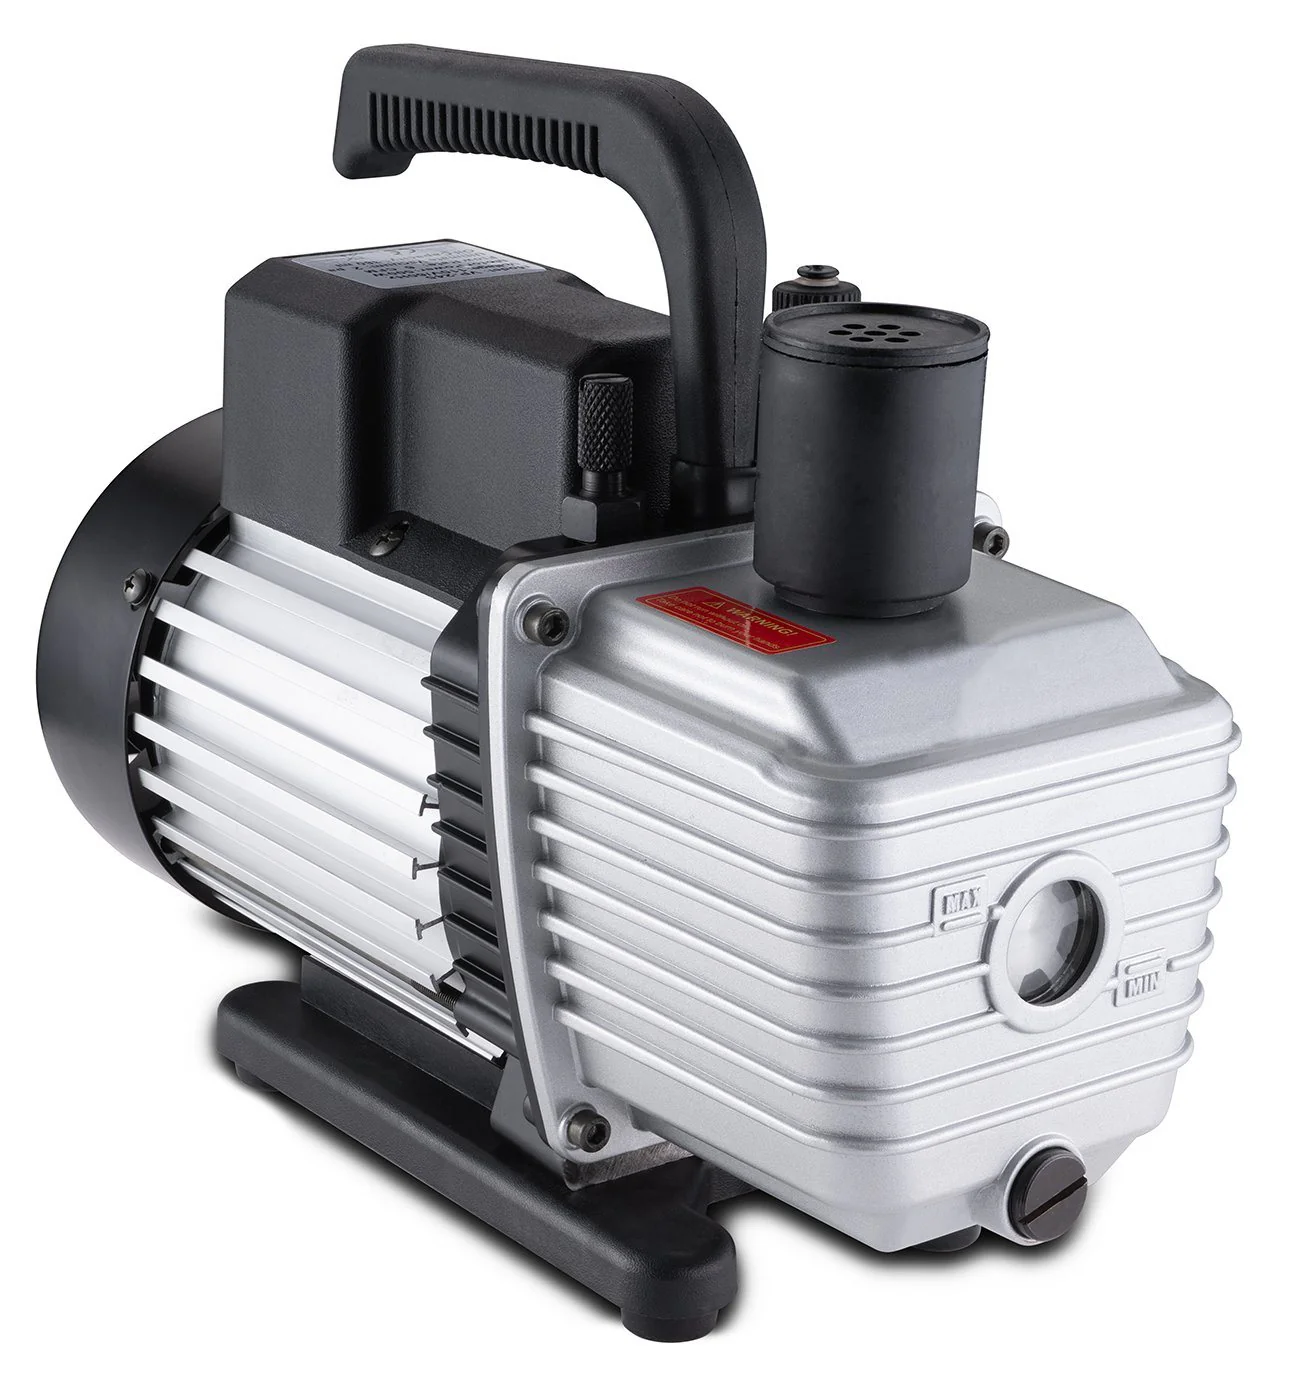 Are the plastic end caps for the flared 3/8” and 1/4” vacuum ports included with the purchase of this vacuum pump?